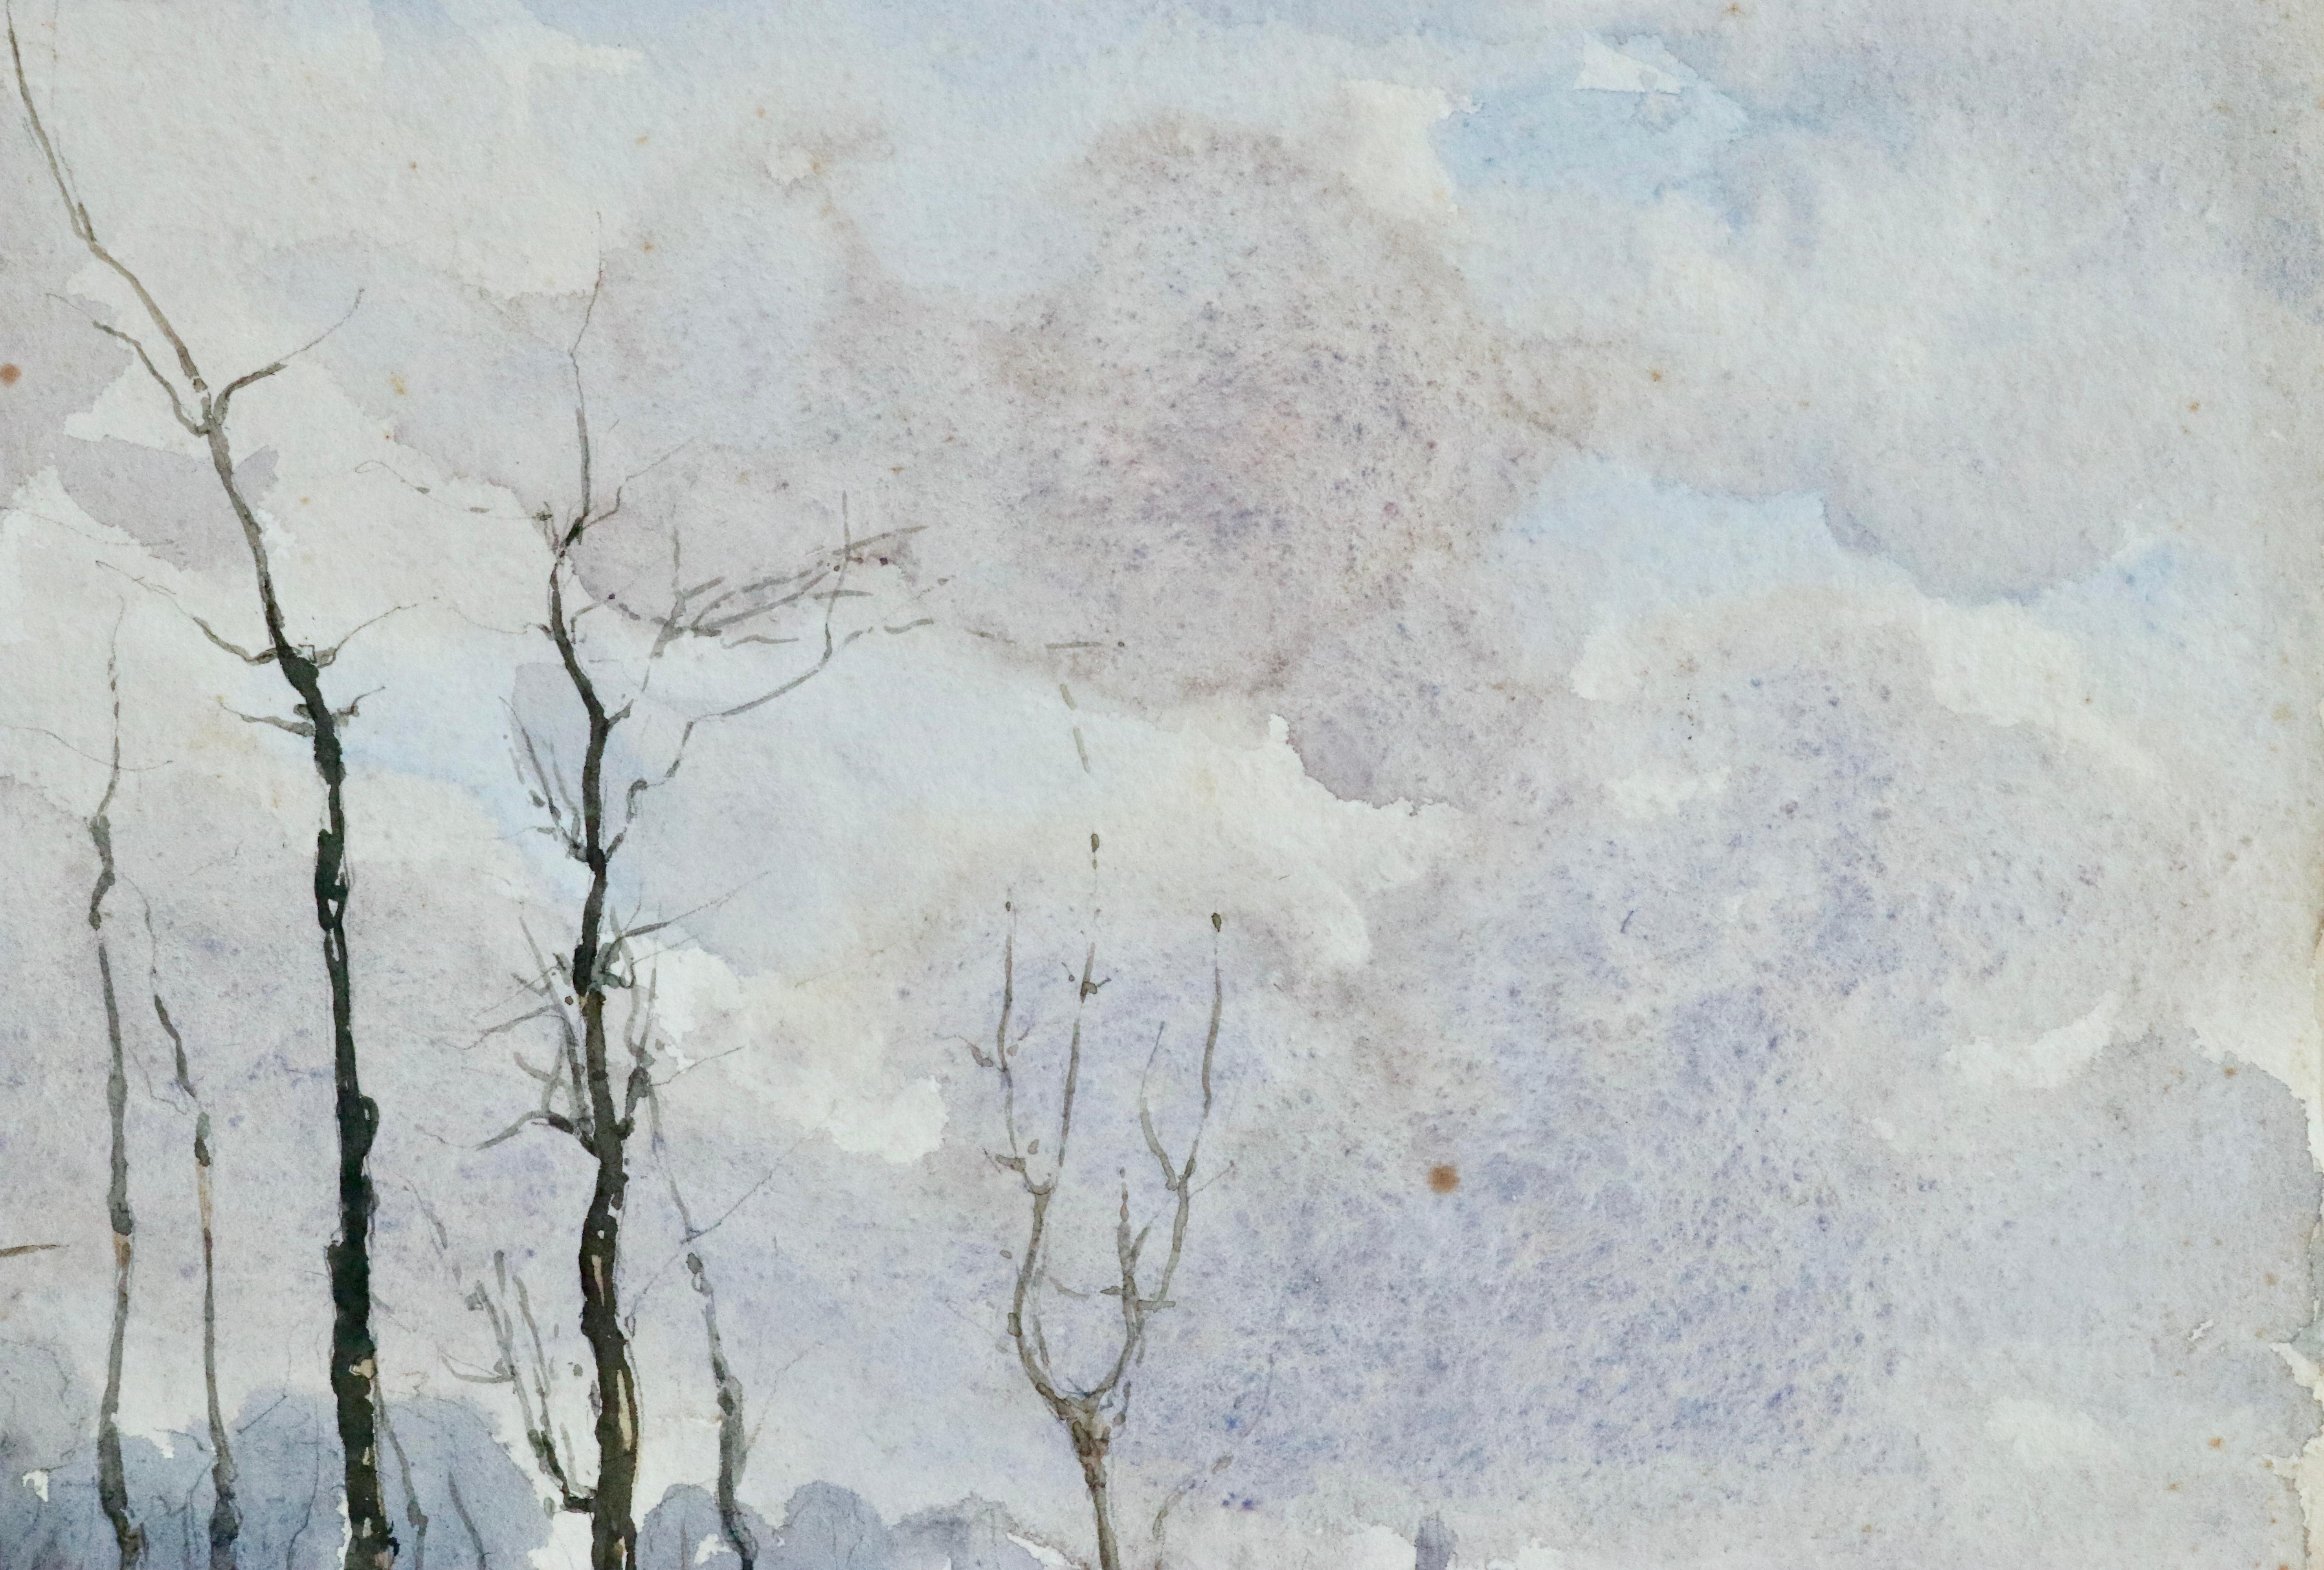 Watercolour on paper by French painter Henri Duhem depicting trees in winter. Signed lower left. This painting is not currently framed but a suitable frame can be sourced if required.

Descendant of an old Flemish family, Henri Duhem was born in